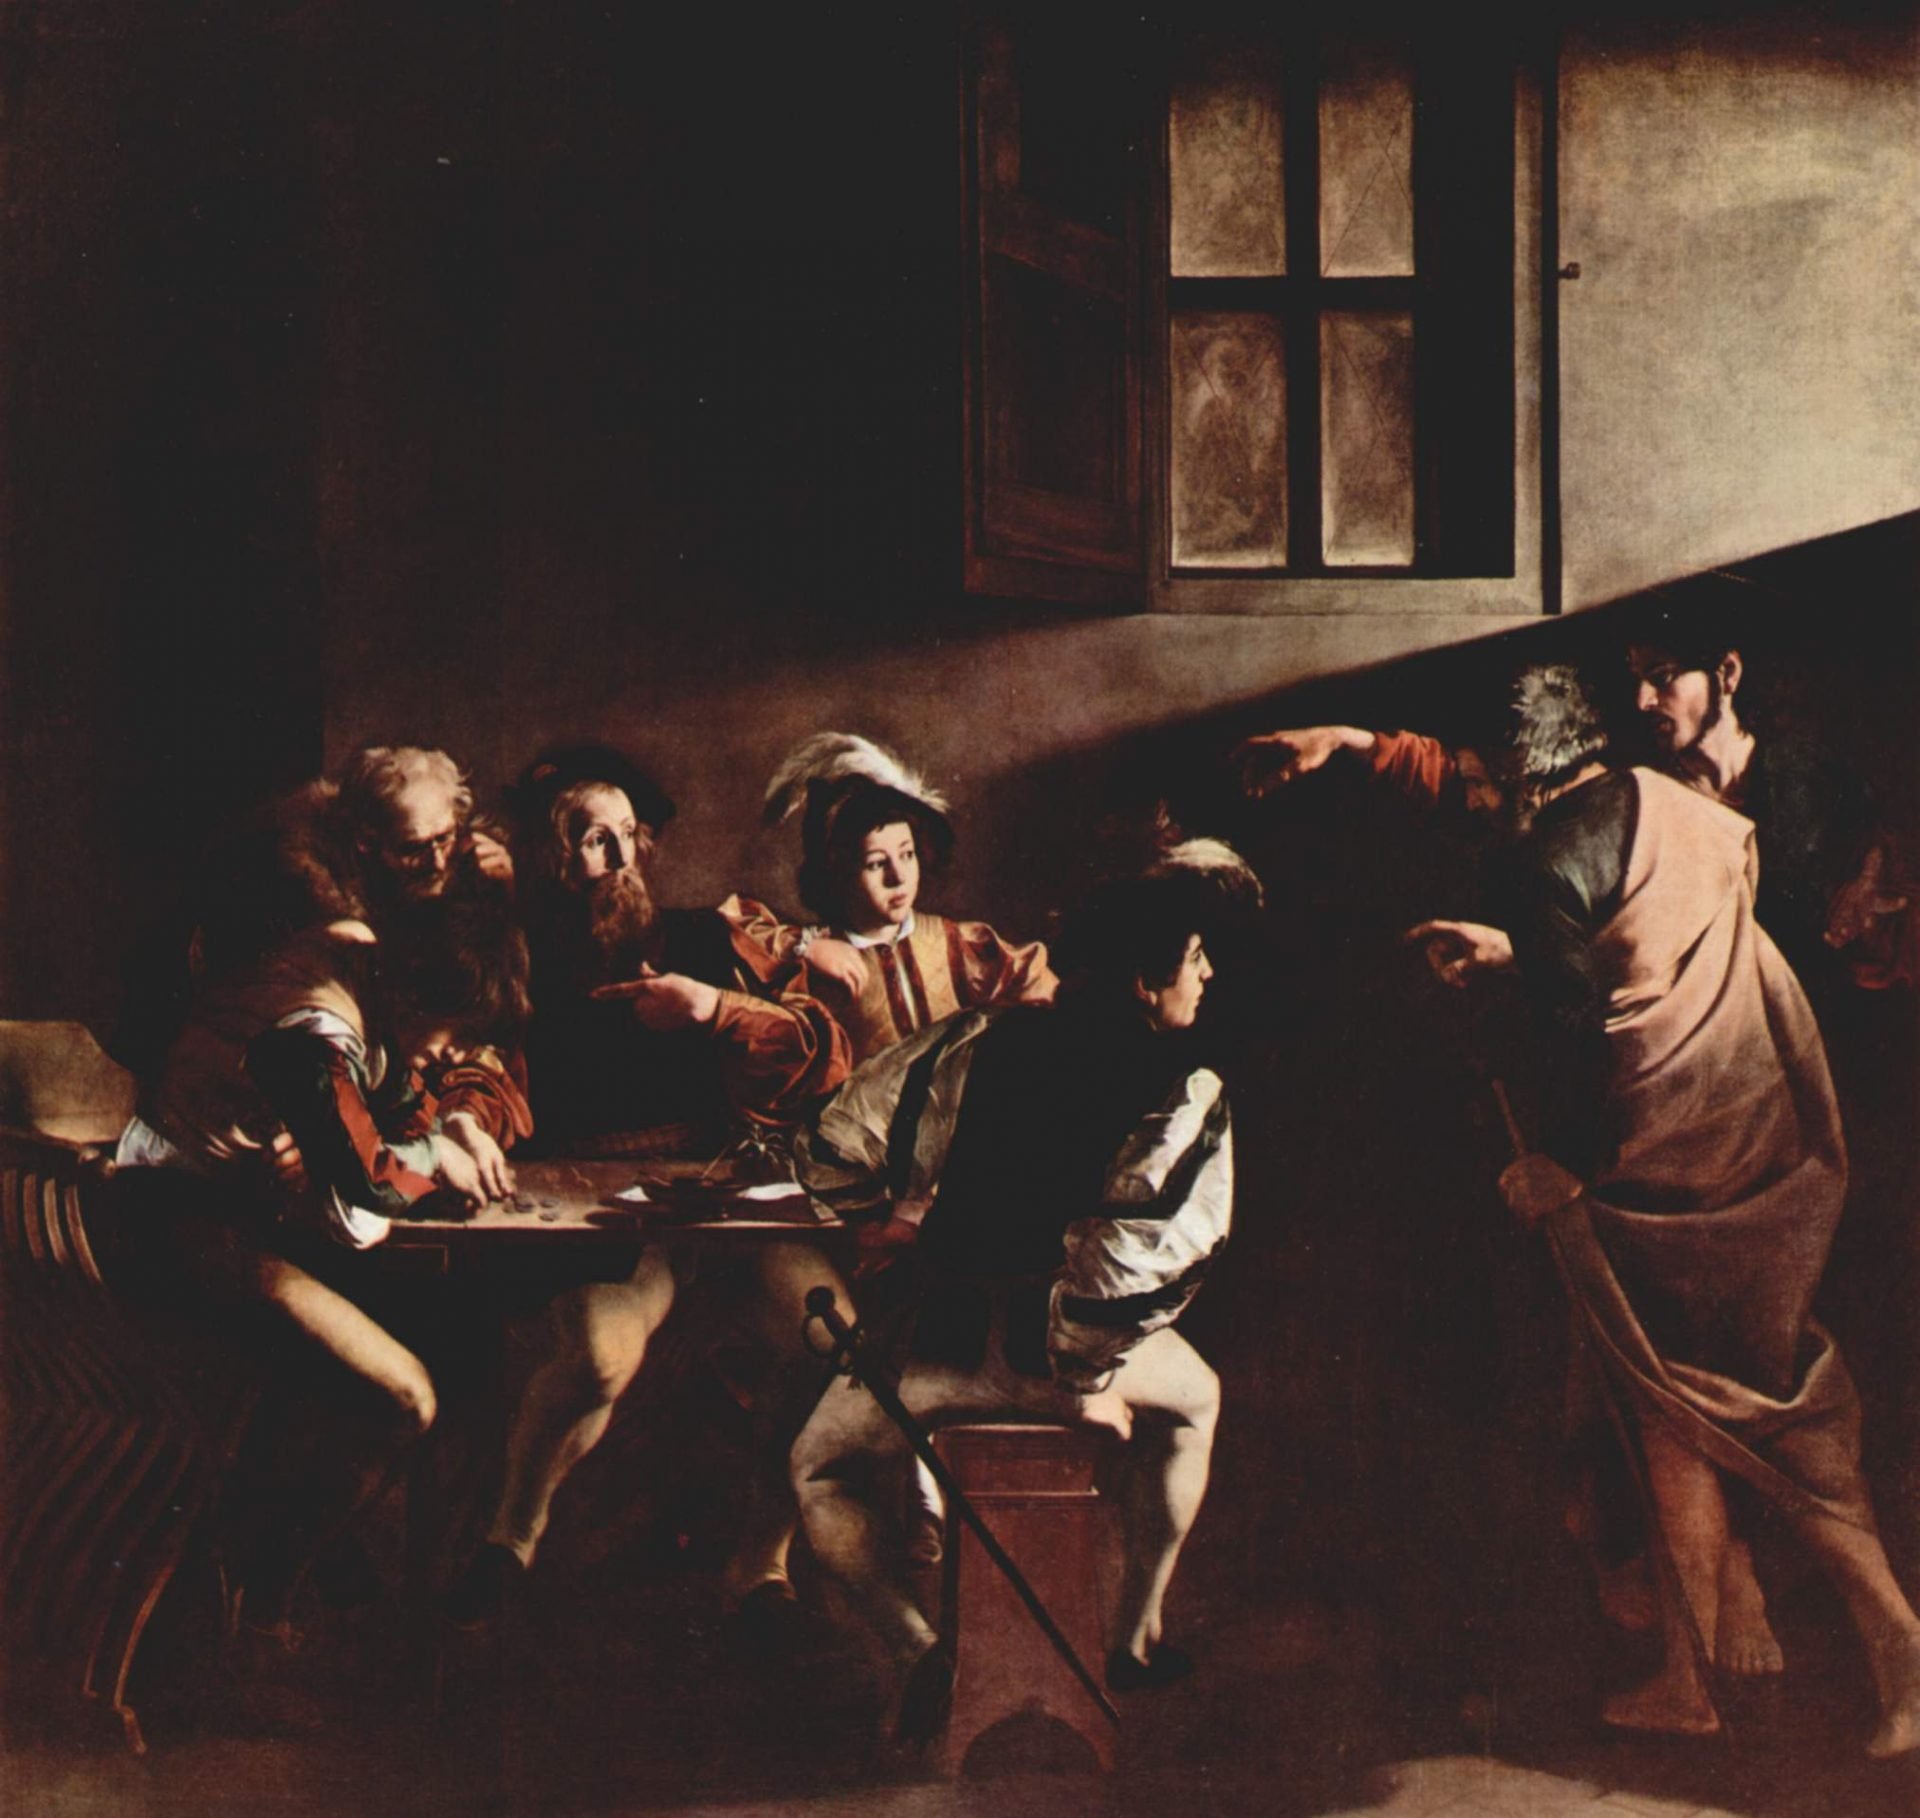 In the painting by Caravaggio, Matthew the tax collector is seated at a table, accompanied by four other men. Jesus Christ and Saint Peter make their entrance into the room, with Jesus gesturing towards Matthew. A beam of light shines upon the faces of those at the table, whose gazes are directed at Jesus Christ.